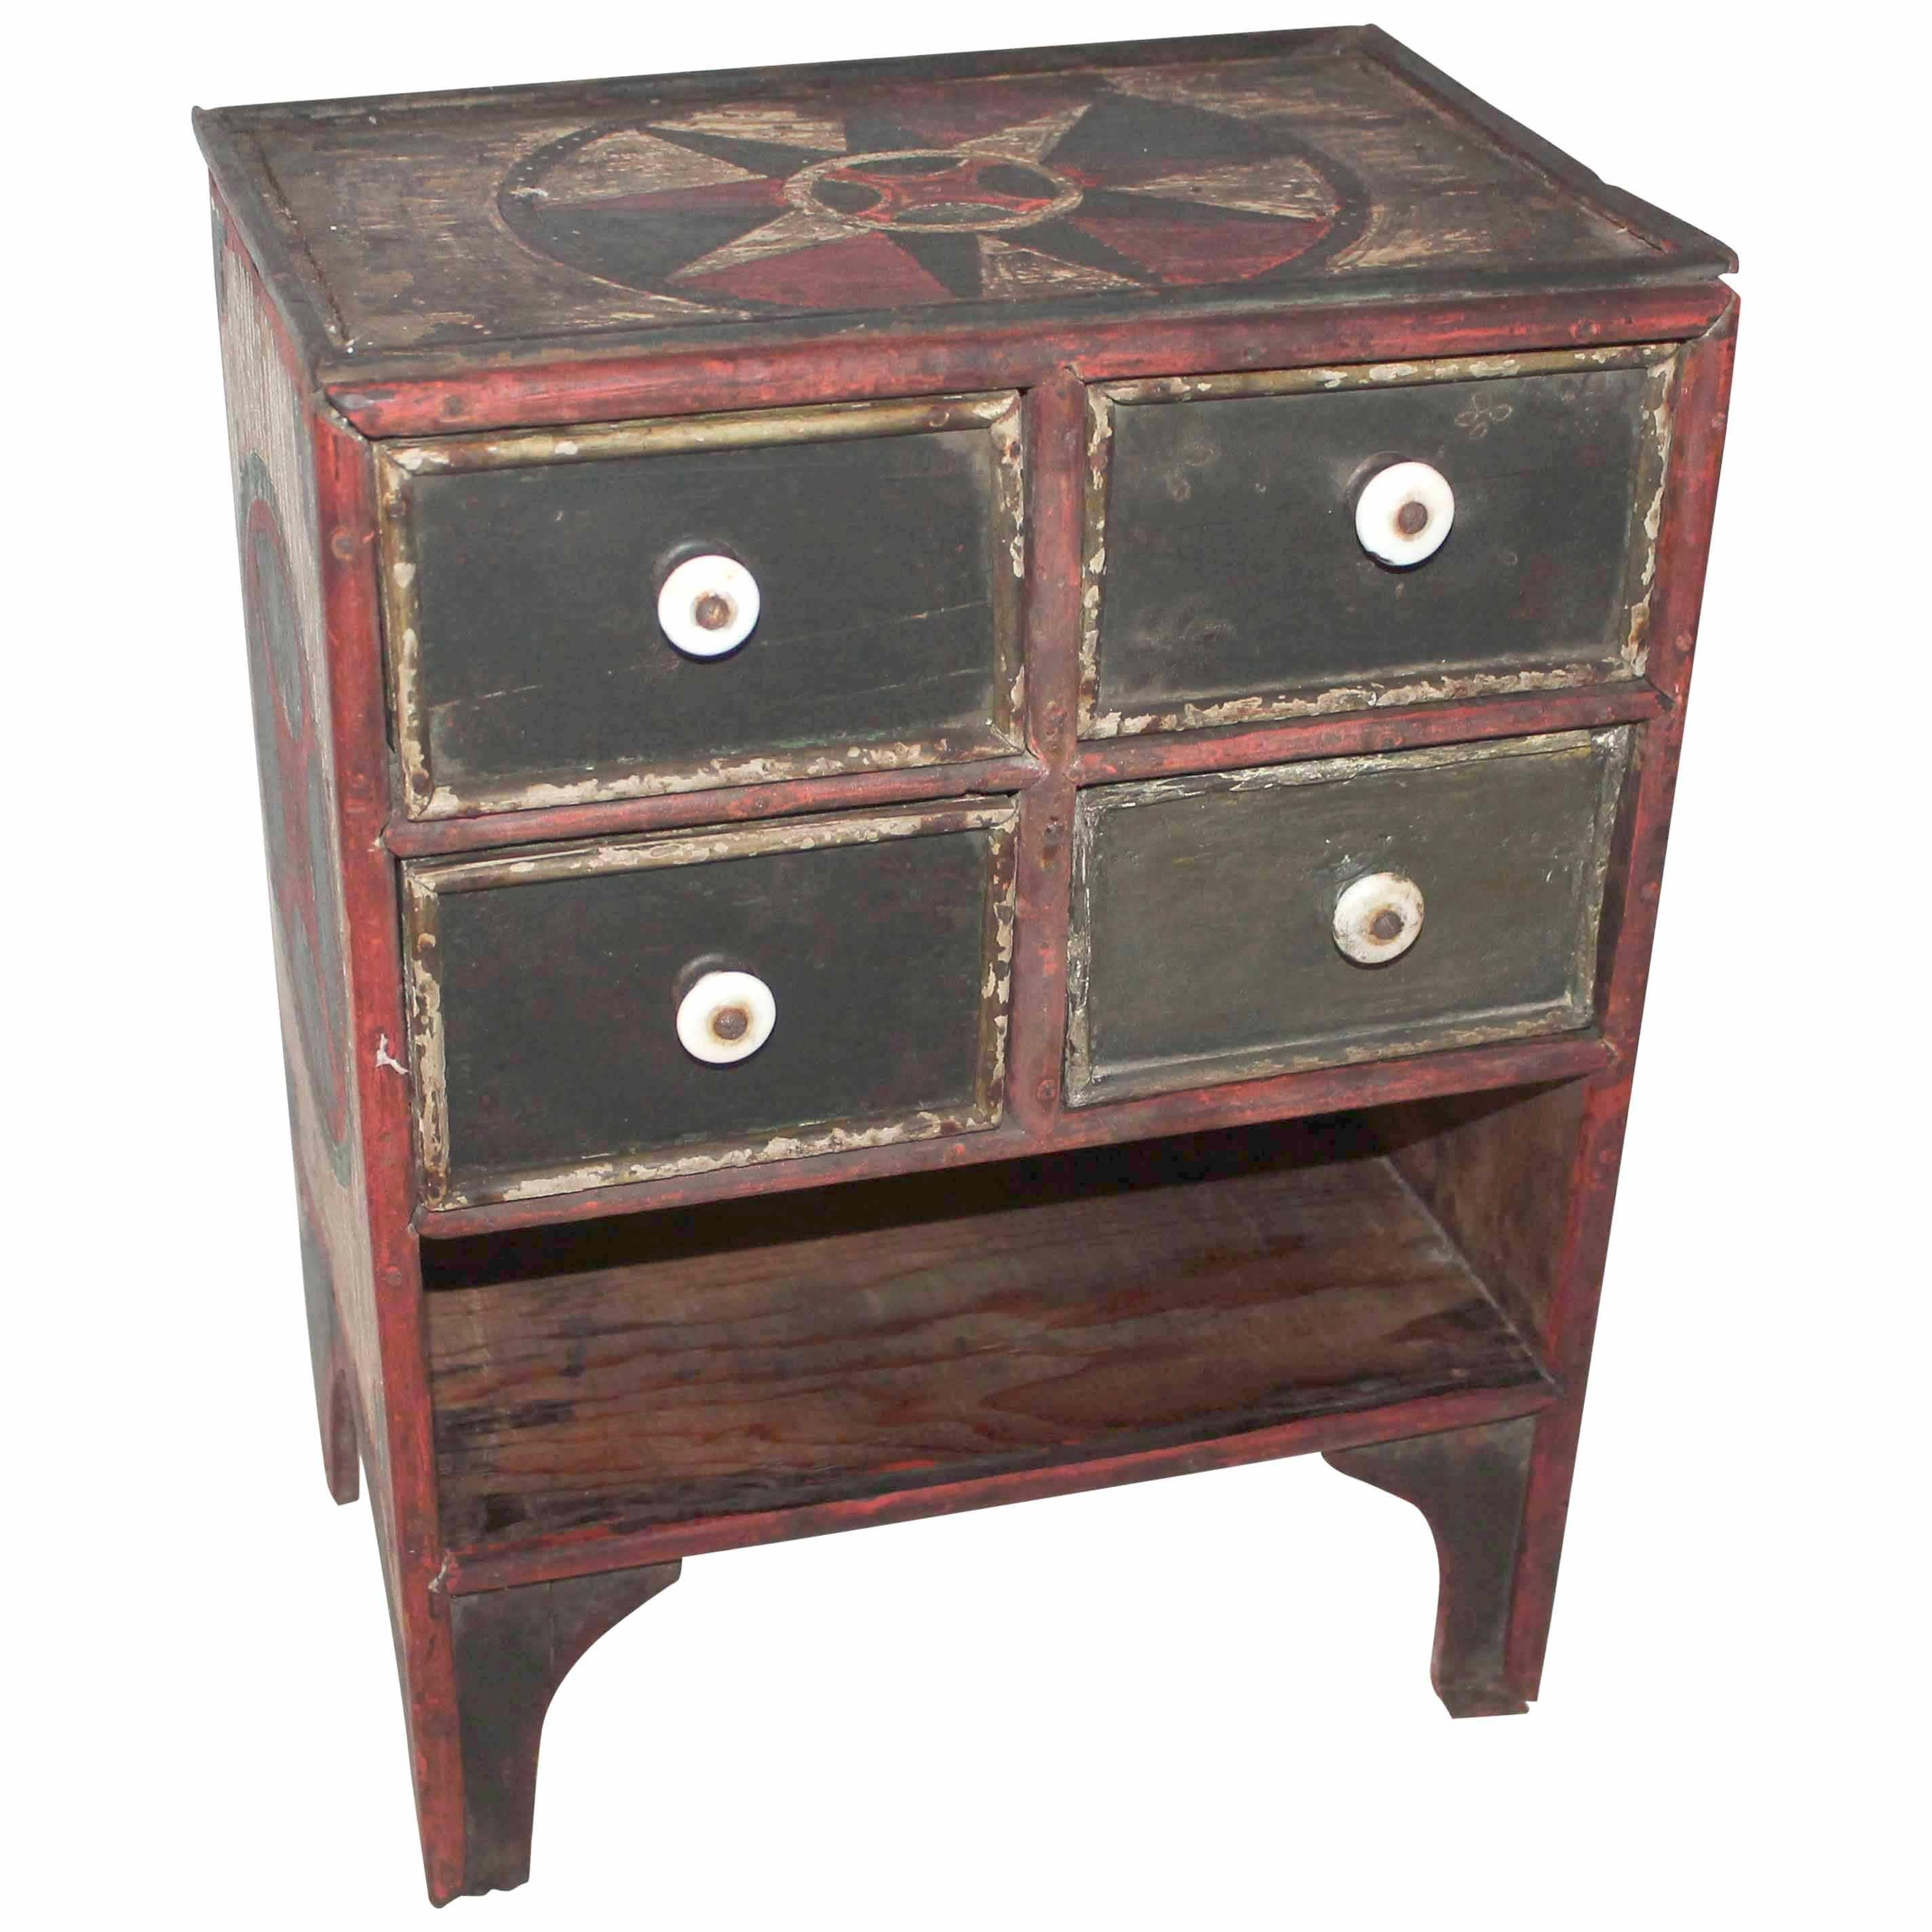 19th Century Original Paint Decorated Tabletop Apothecary Cabinet